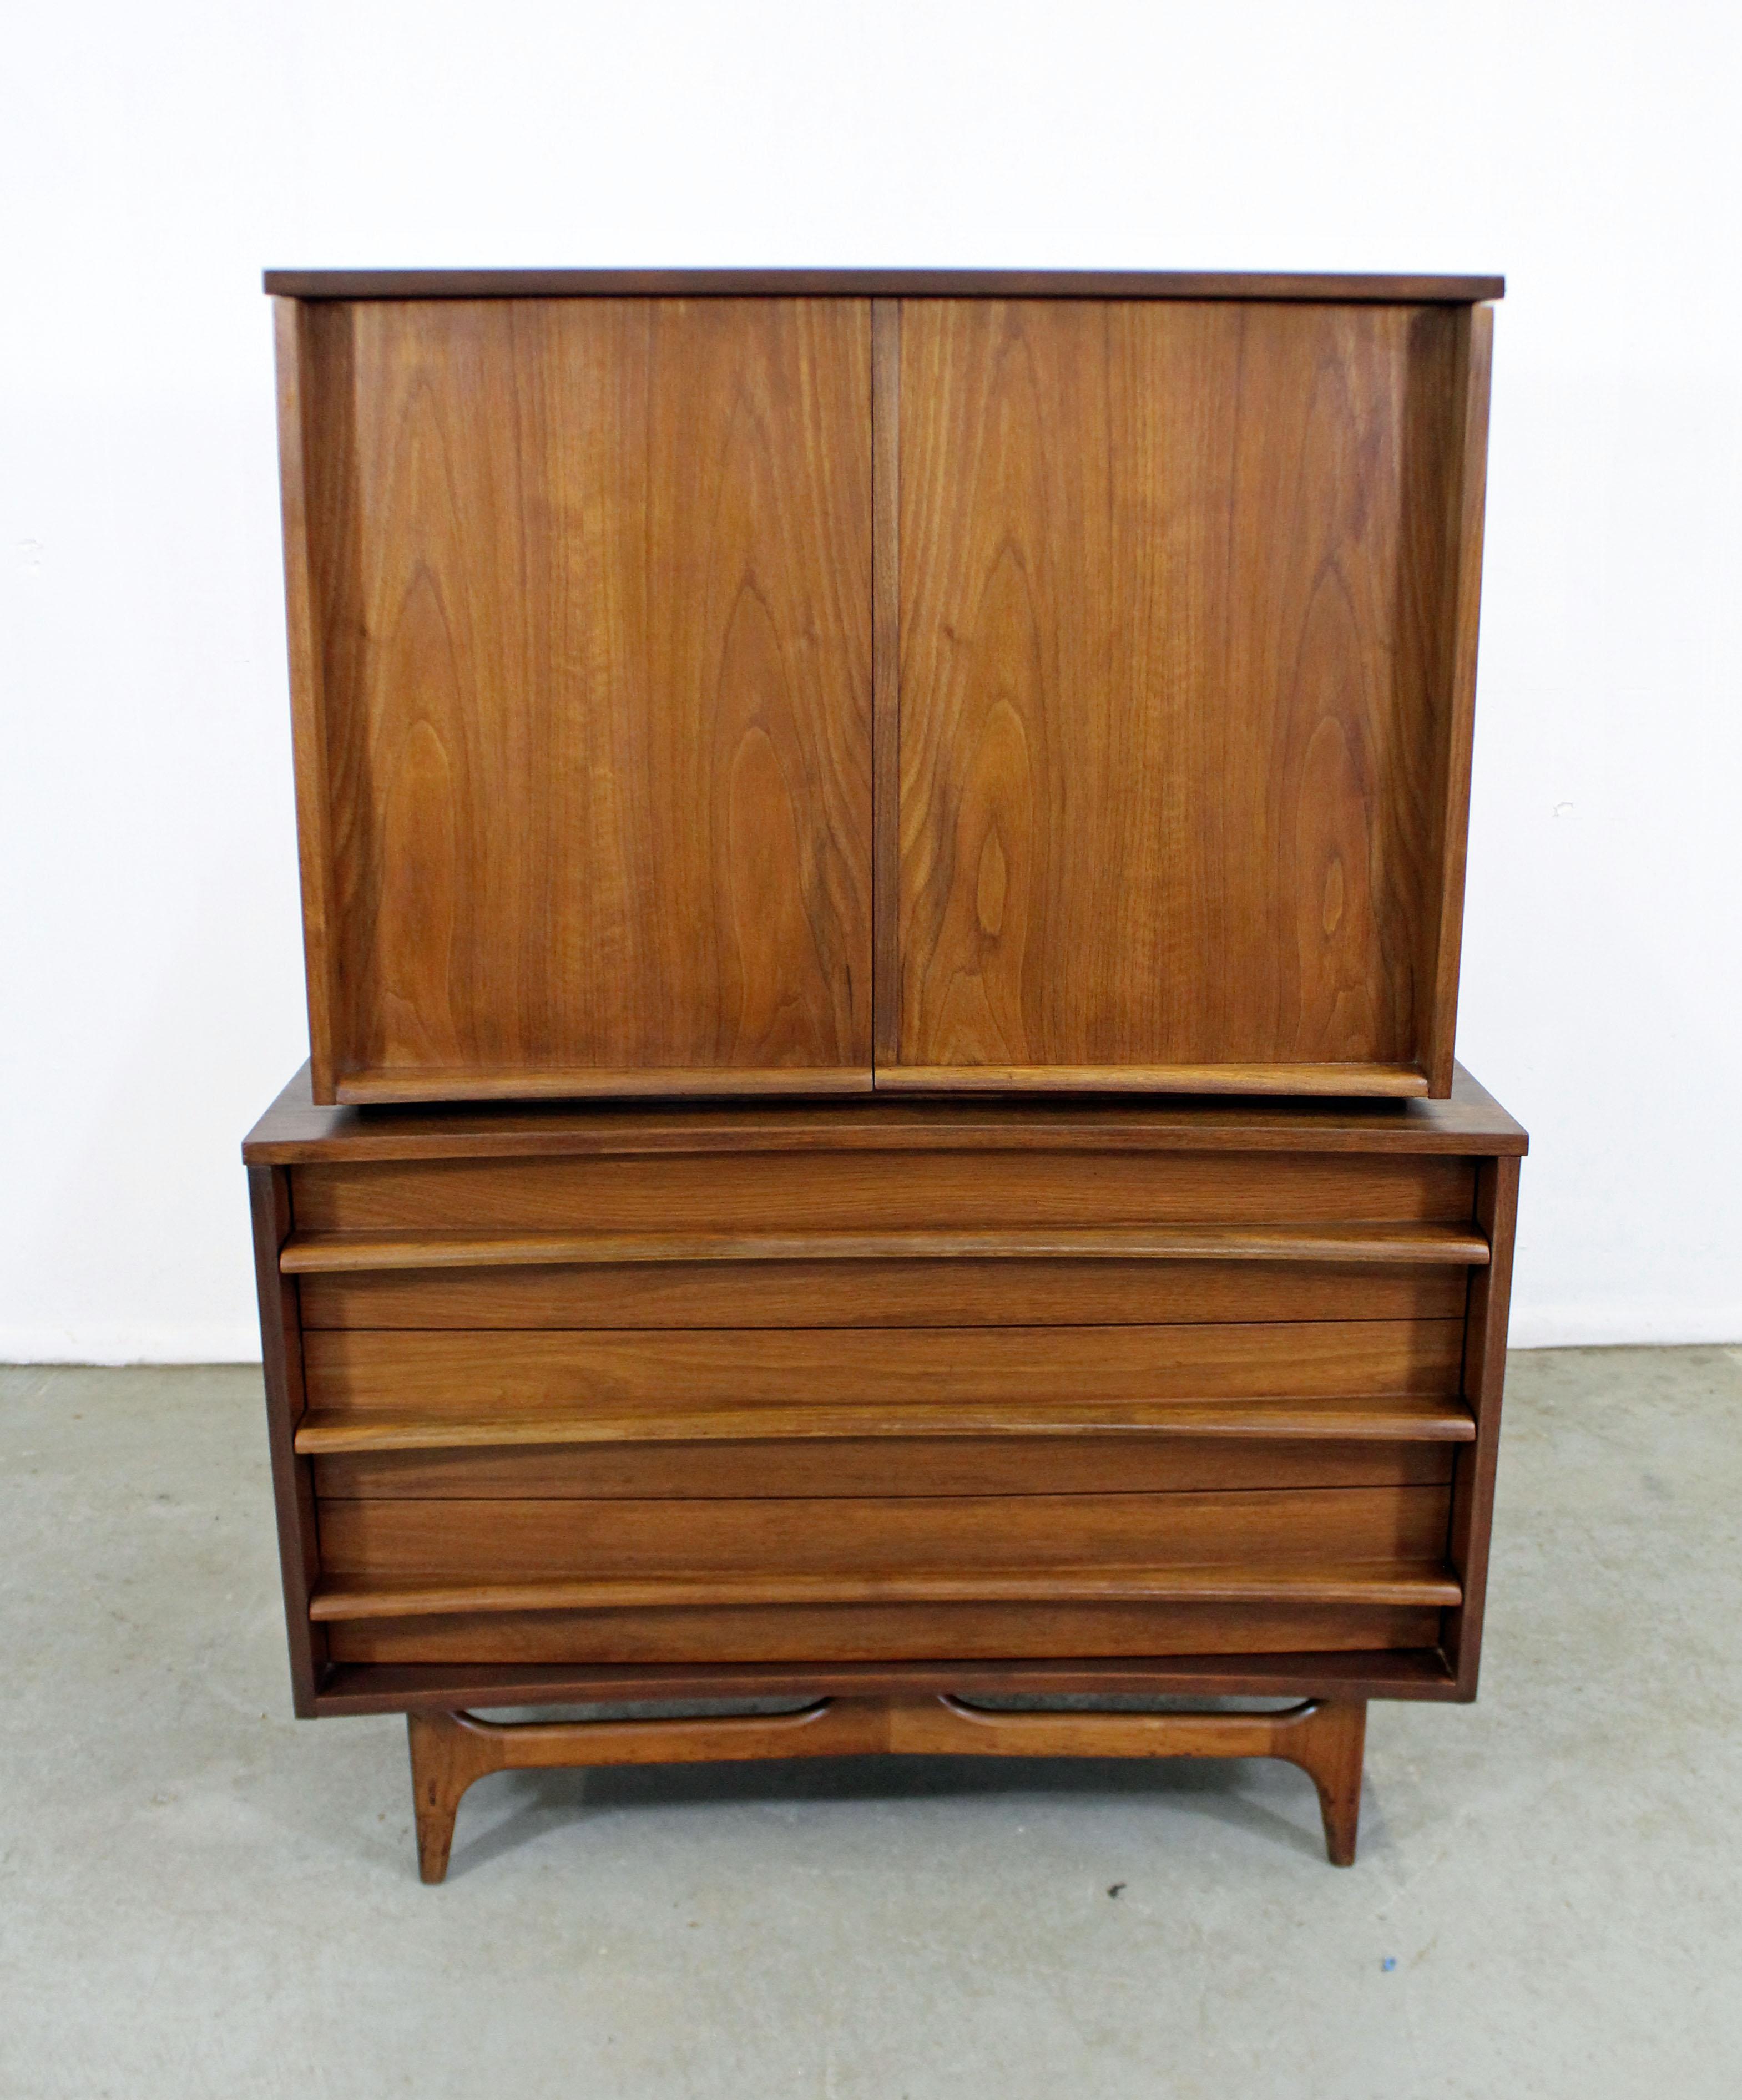 Offered is a beautiful Mid-Century Modern tall chest with ample storage space. This piece is made of walnut, featuring a concave front, 2 doors with six dovetailed drawers and inside shelving. It is in good vintage condition, shows slight age wear